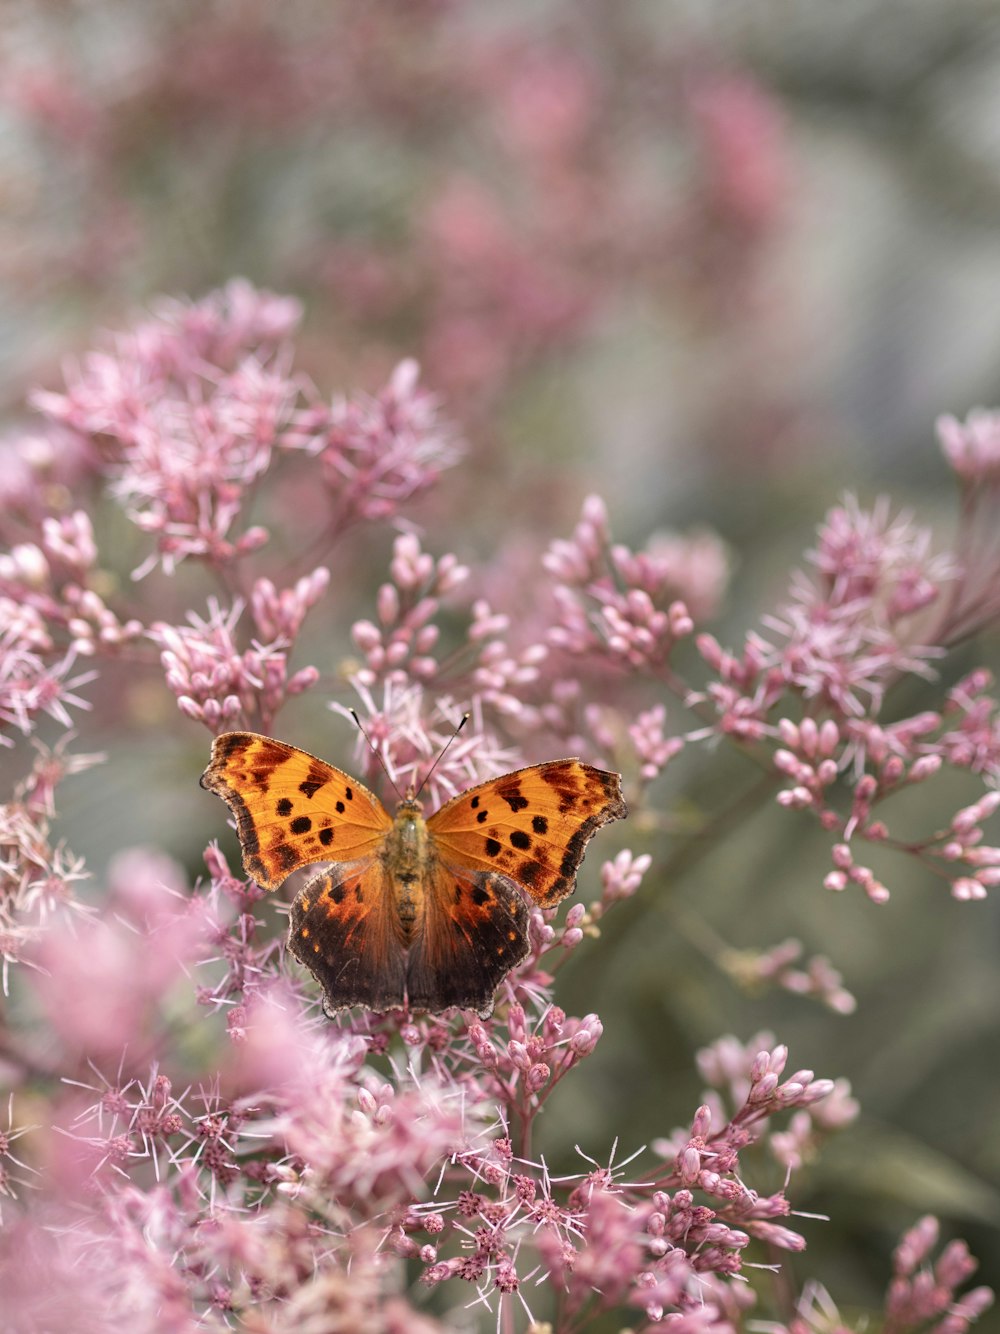 brown and black butterfly perched on pink flower